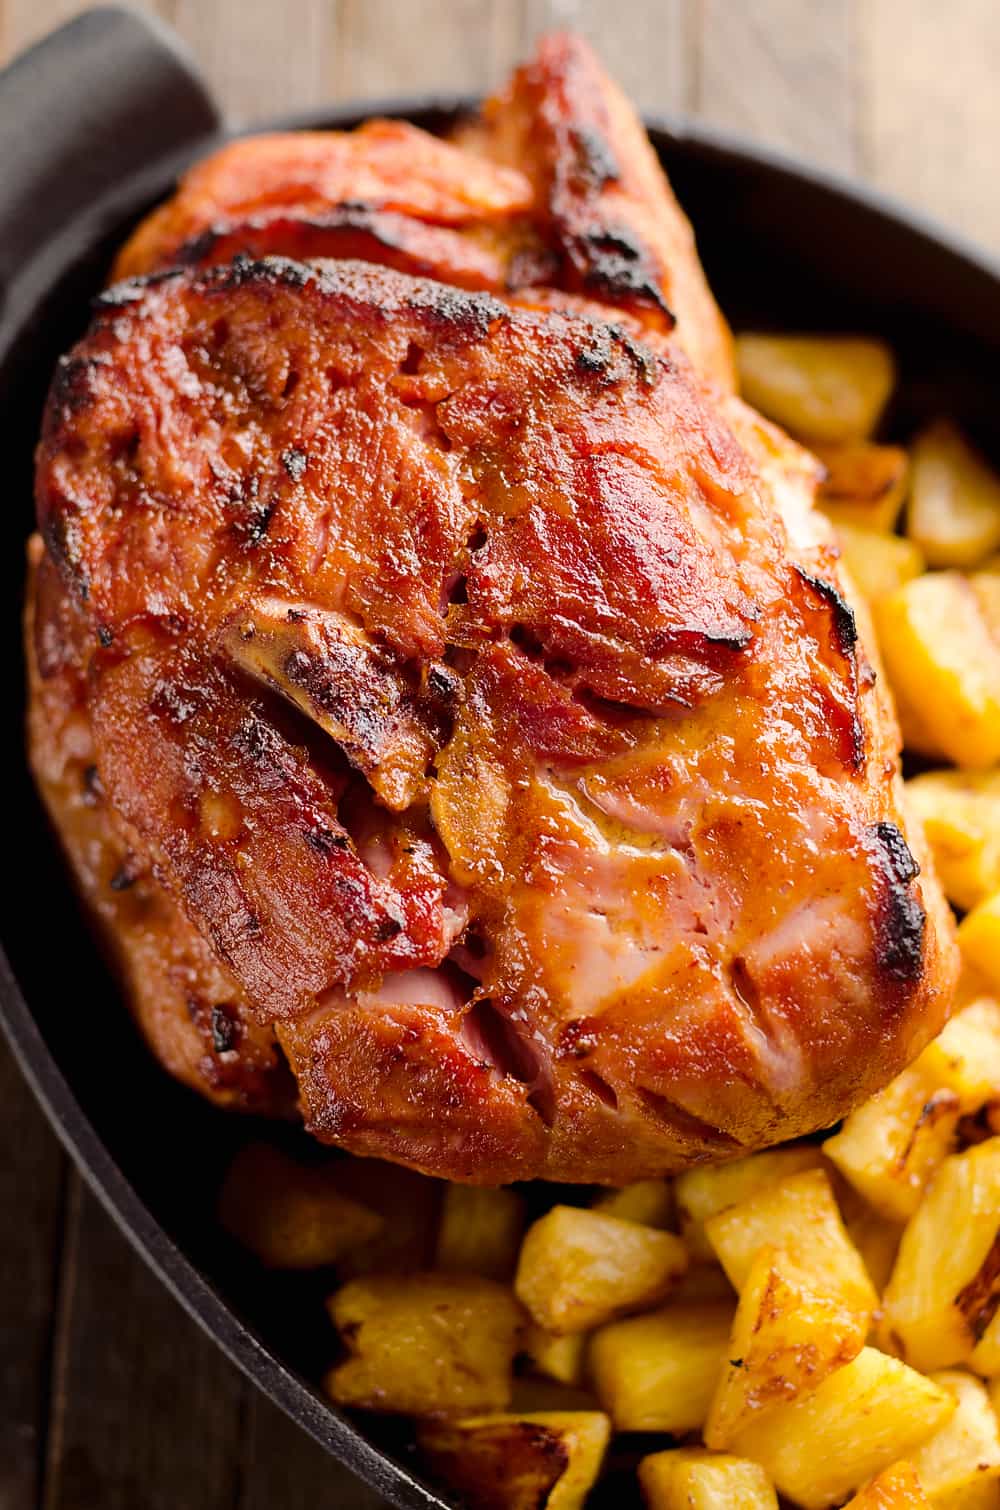 Roasted Pineapple & Chipotle Honey Ham is a sweet and spicy twist on your traditional holiday meal. This easy recipe is finished off with fresh pineapple roasted to sweet perfection for a perfect compliment to the salty and smoky ham. 